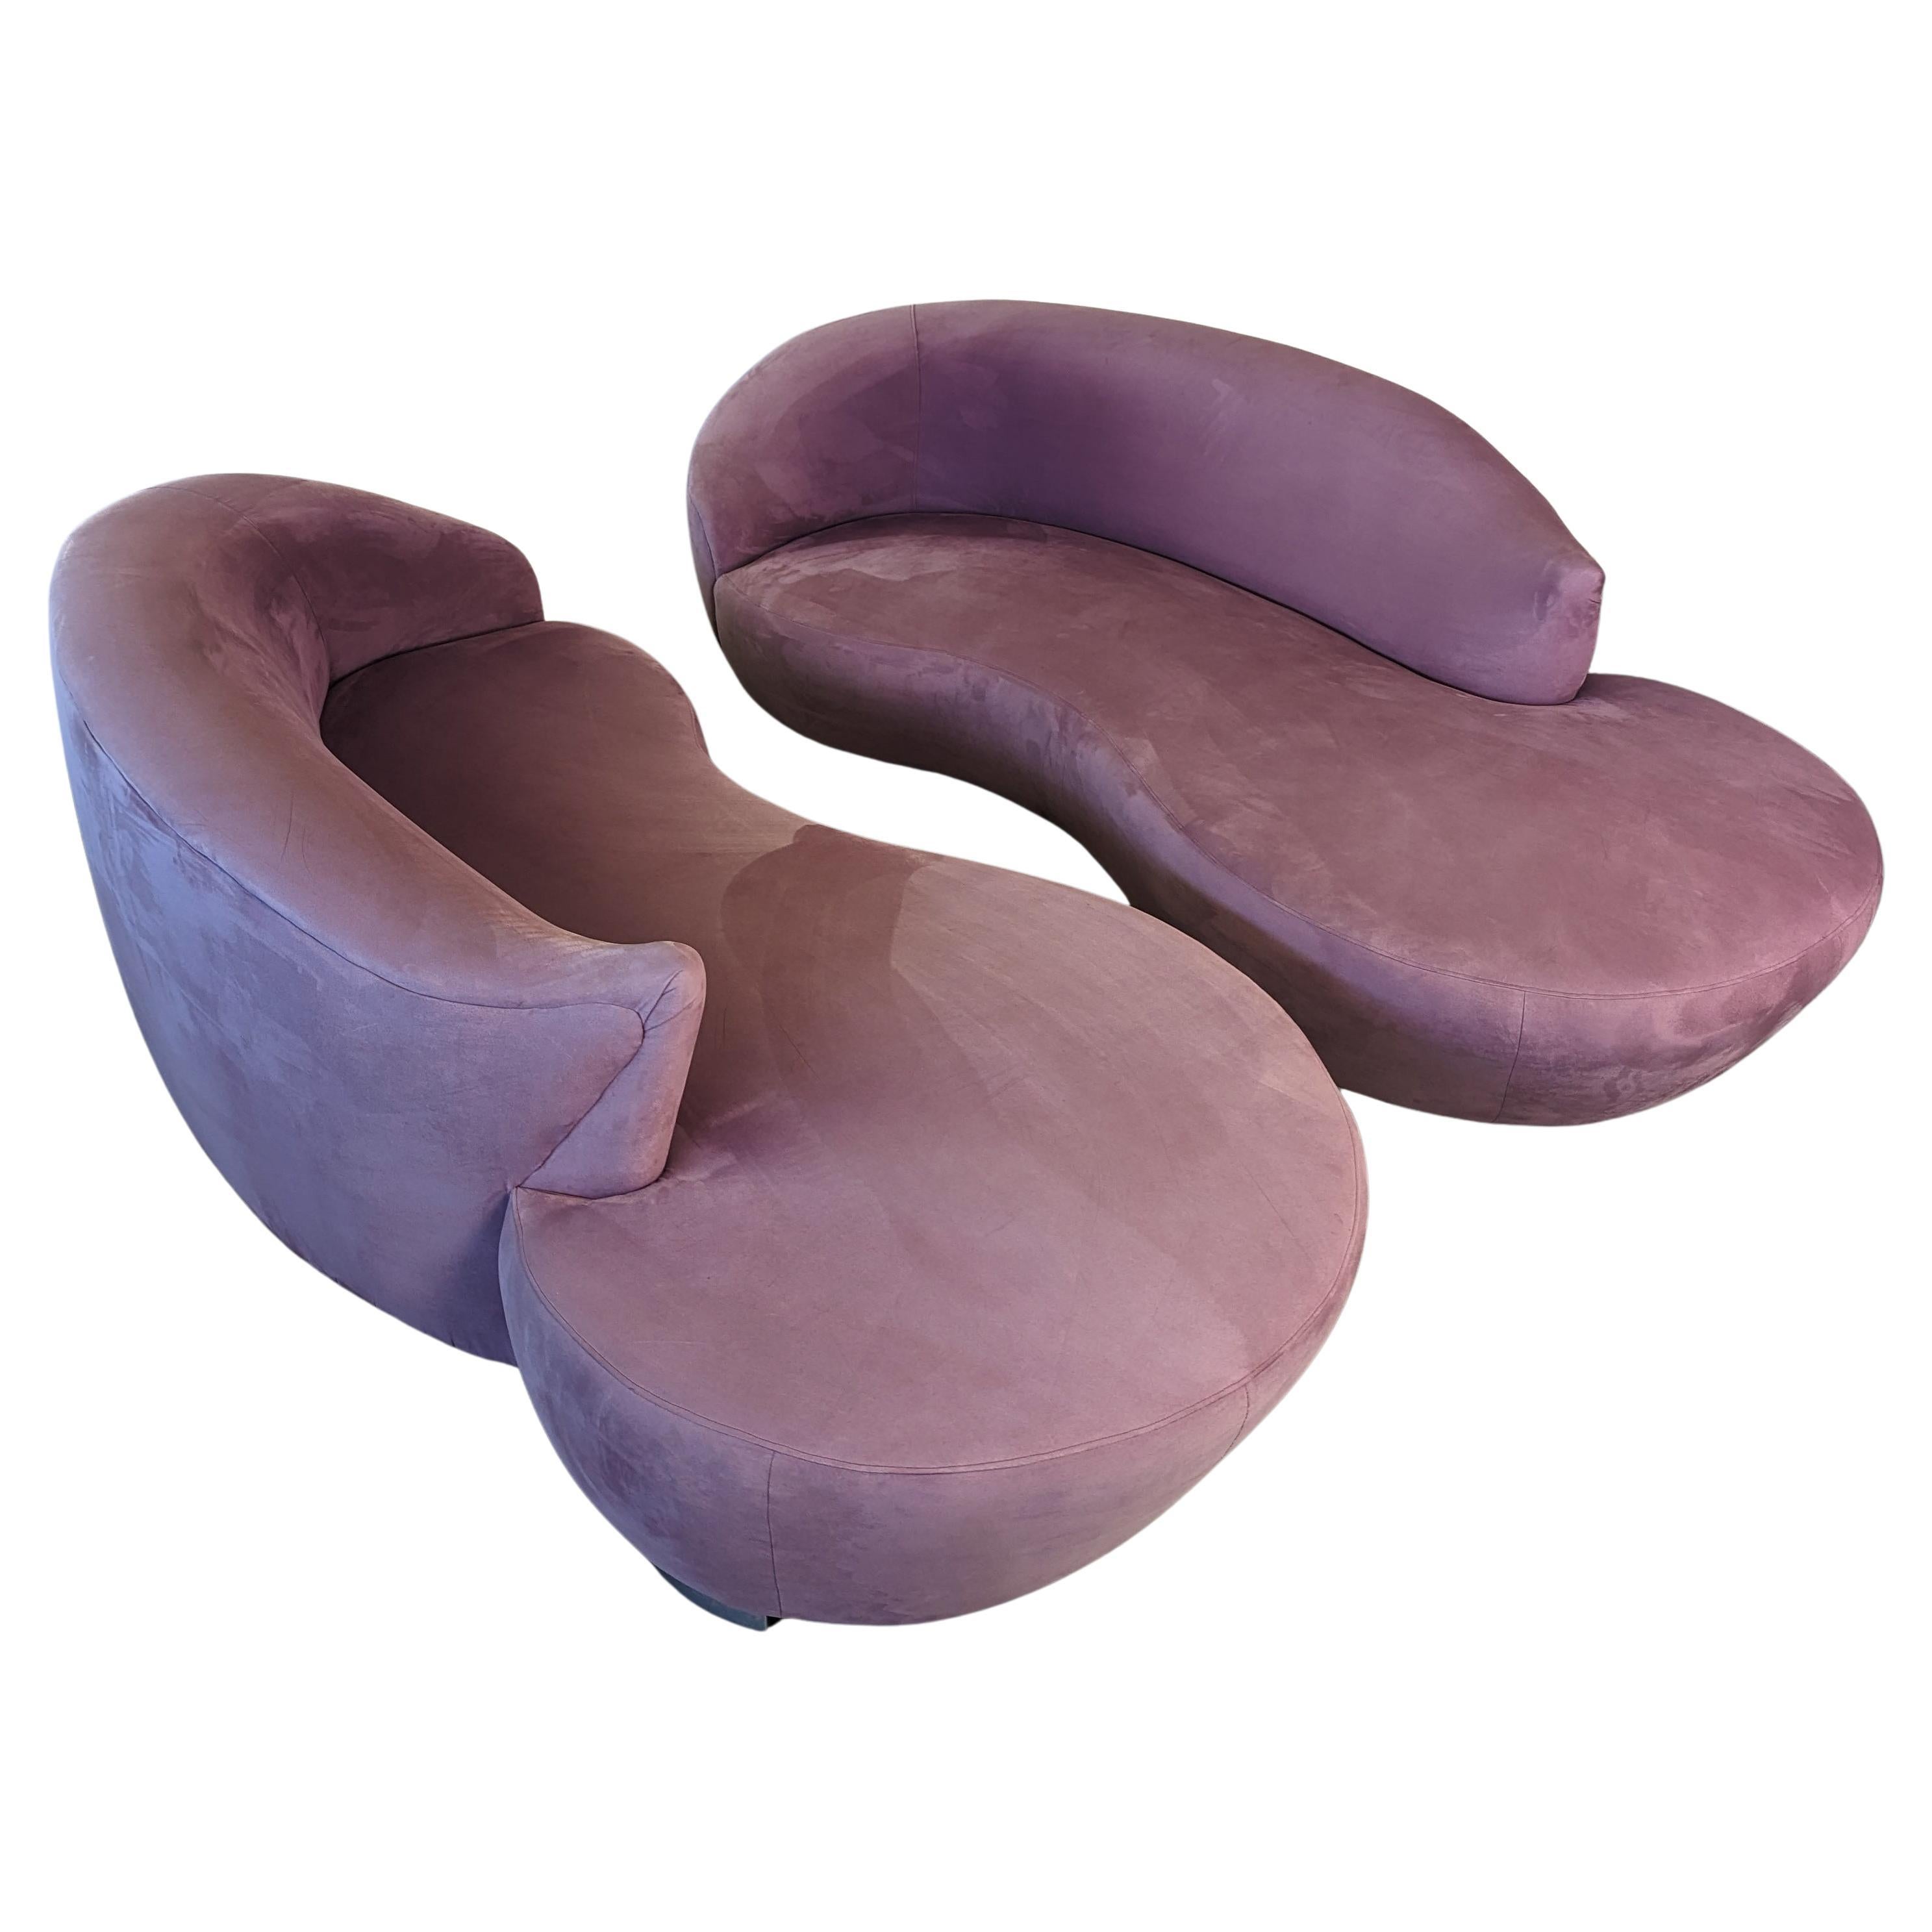 Pair of Postmodern Mauve Pink Serpentine Cloud Sofas, c1990s For Sale